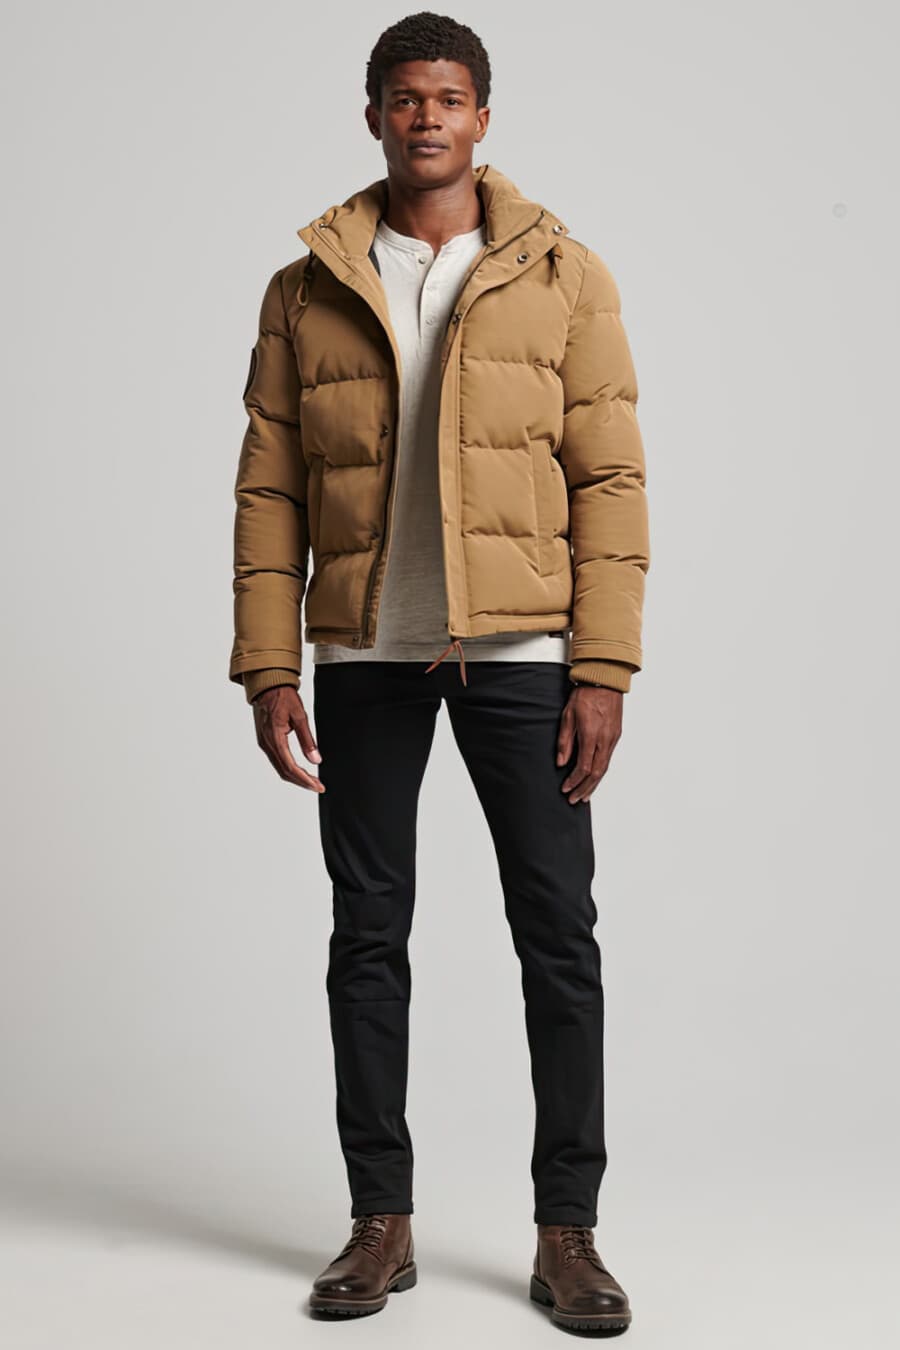 Men's black jeans, white Henley top, cropped camel puffer jacket and brown leather boots outfit